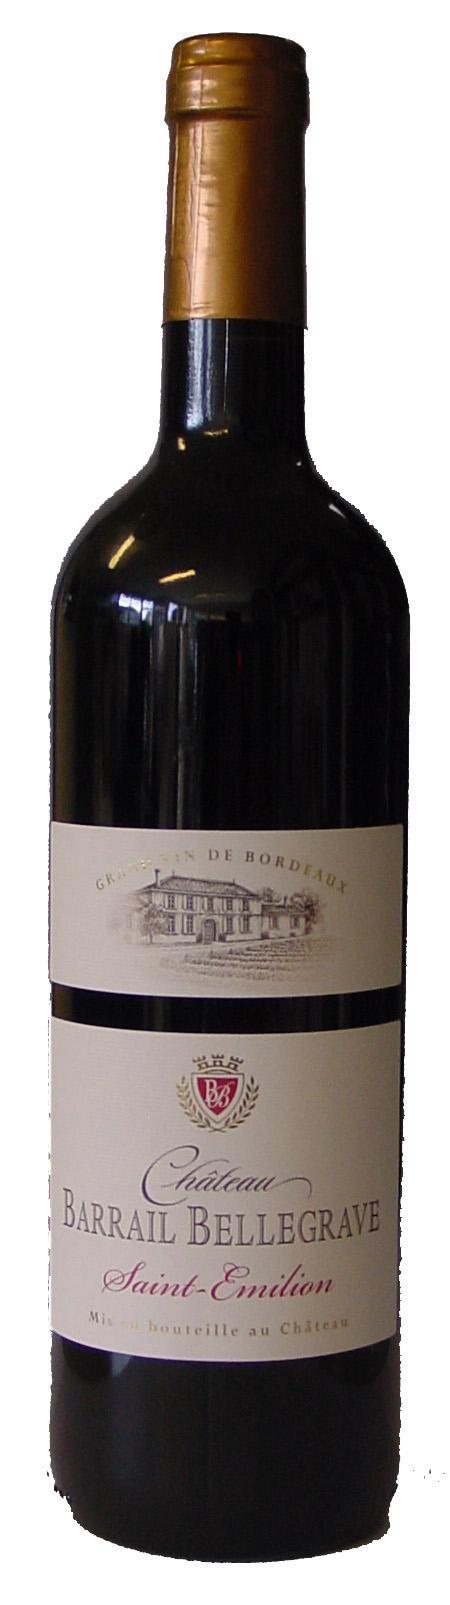 SAINT-EMILION A.O.C. 2010 CHATEAU BARRAIL BELLEGRAVE REF : BOR107 It is in July 2010 that Hermine, in place since 2004, replaced his father.